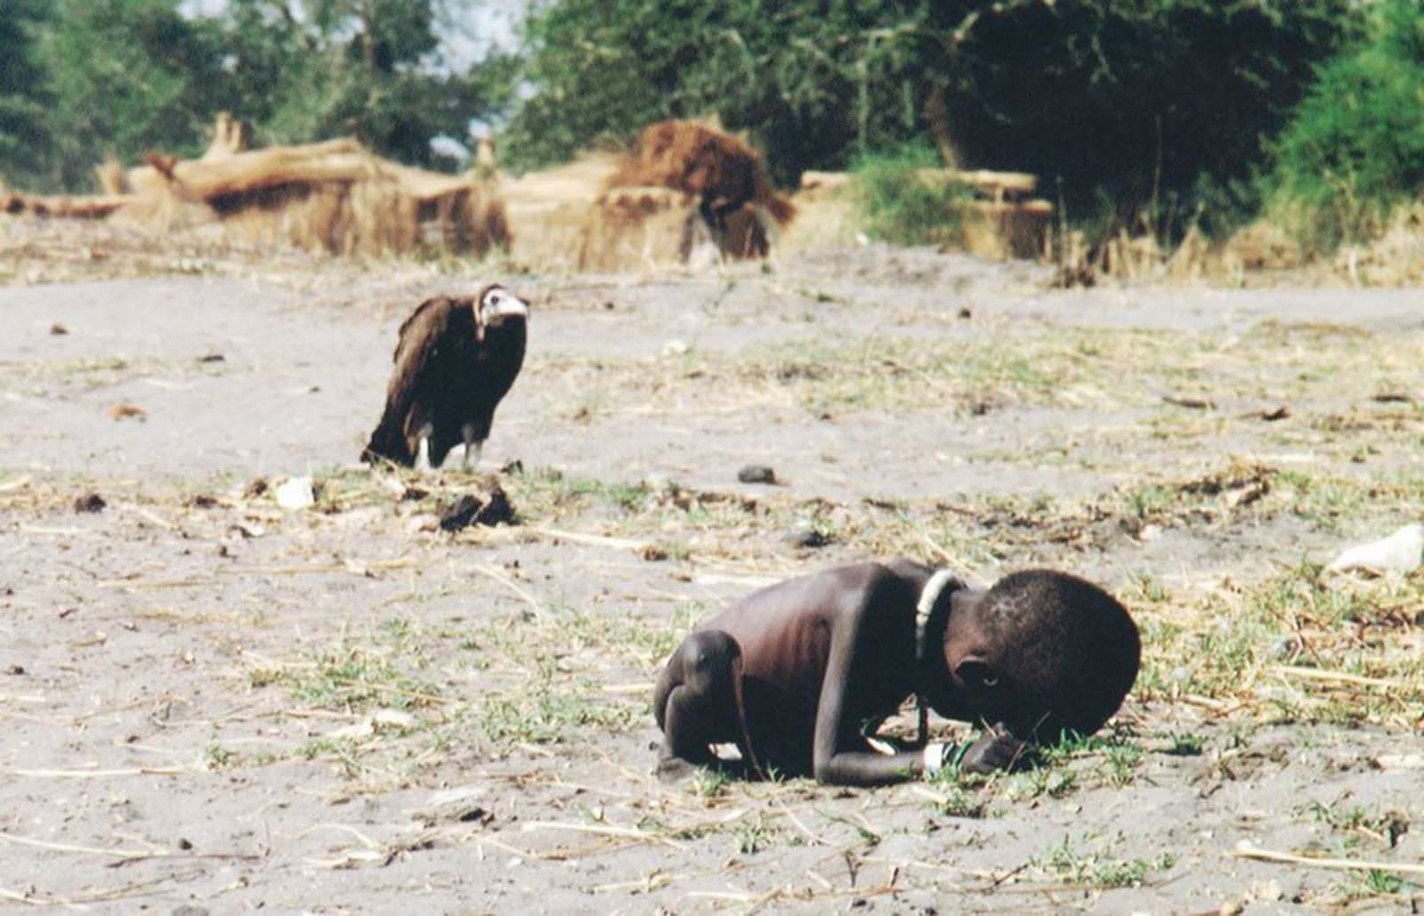 Starving Child and Vulture, Kevin Carter, 1993